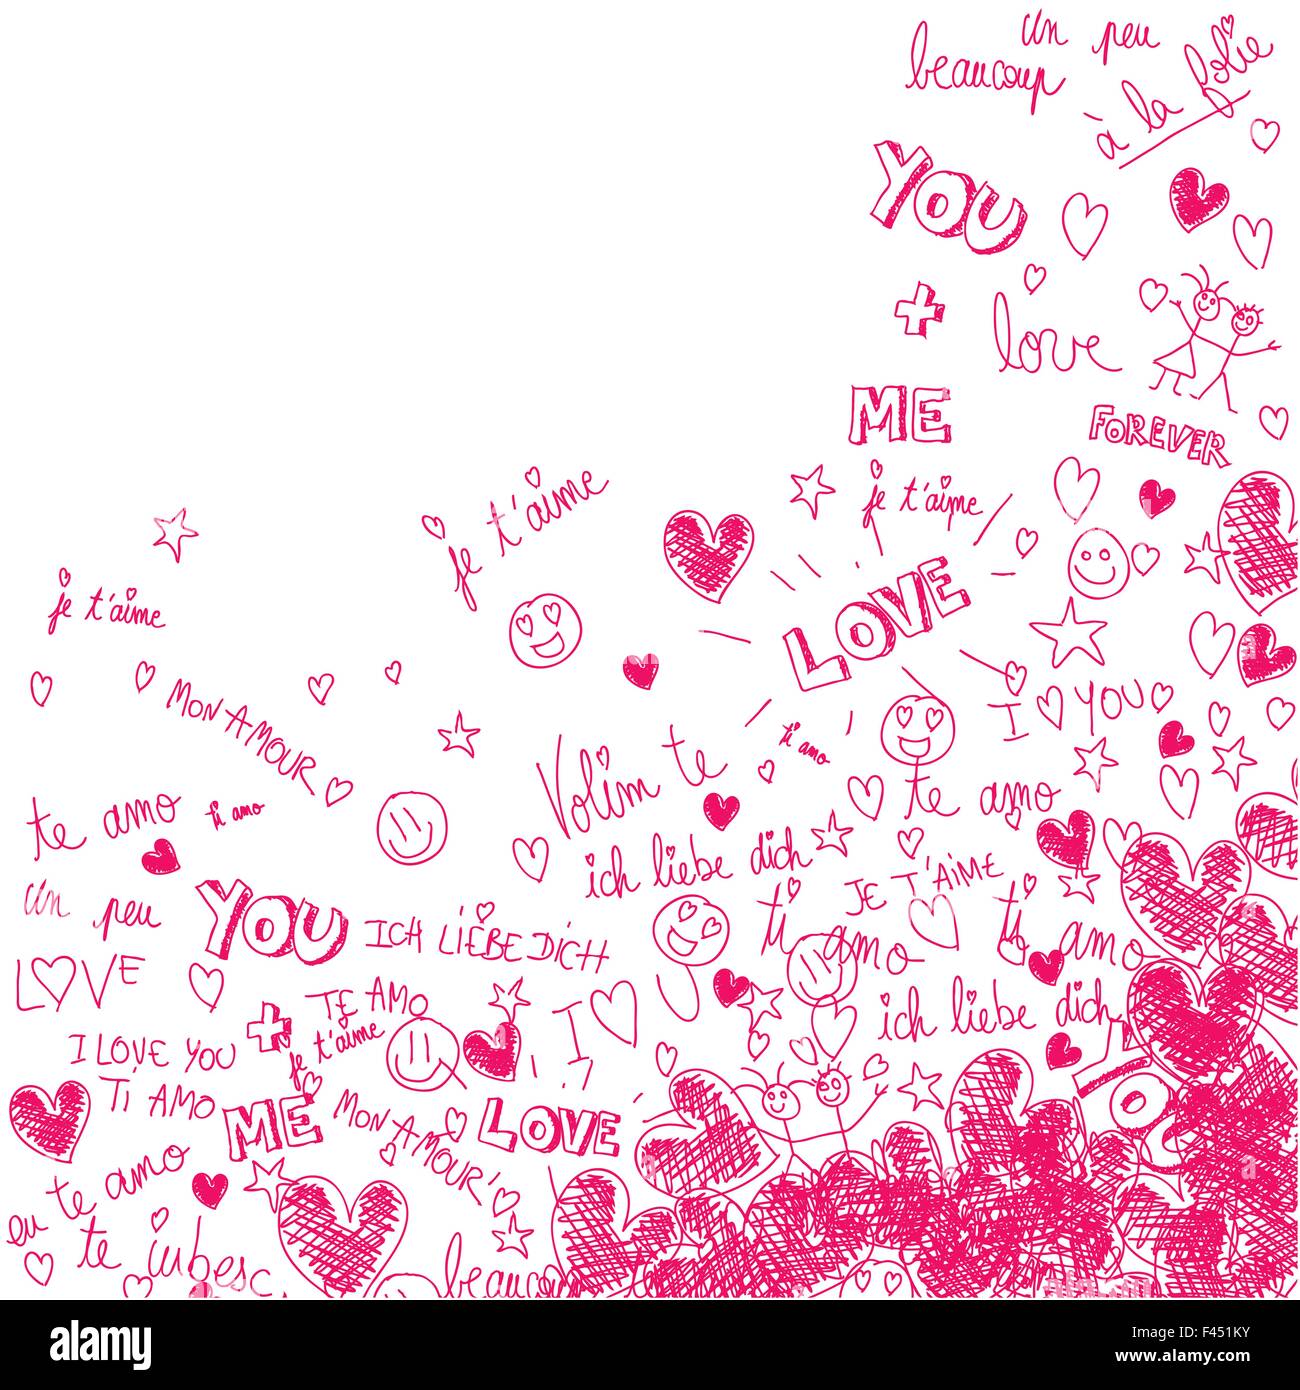 Love background with hand made doodles Stock Vector